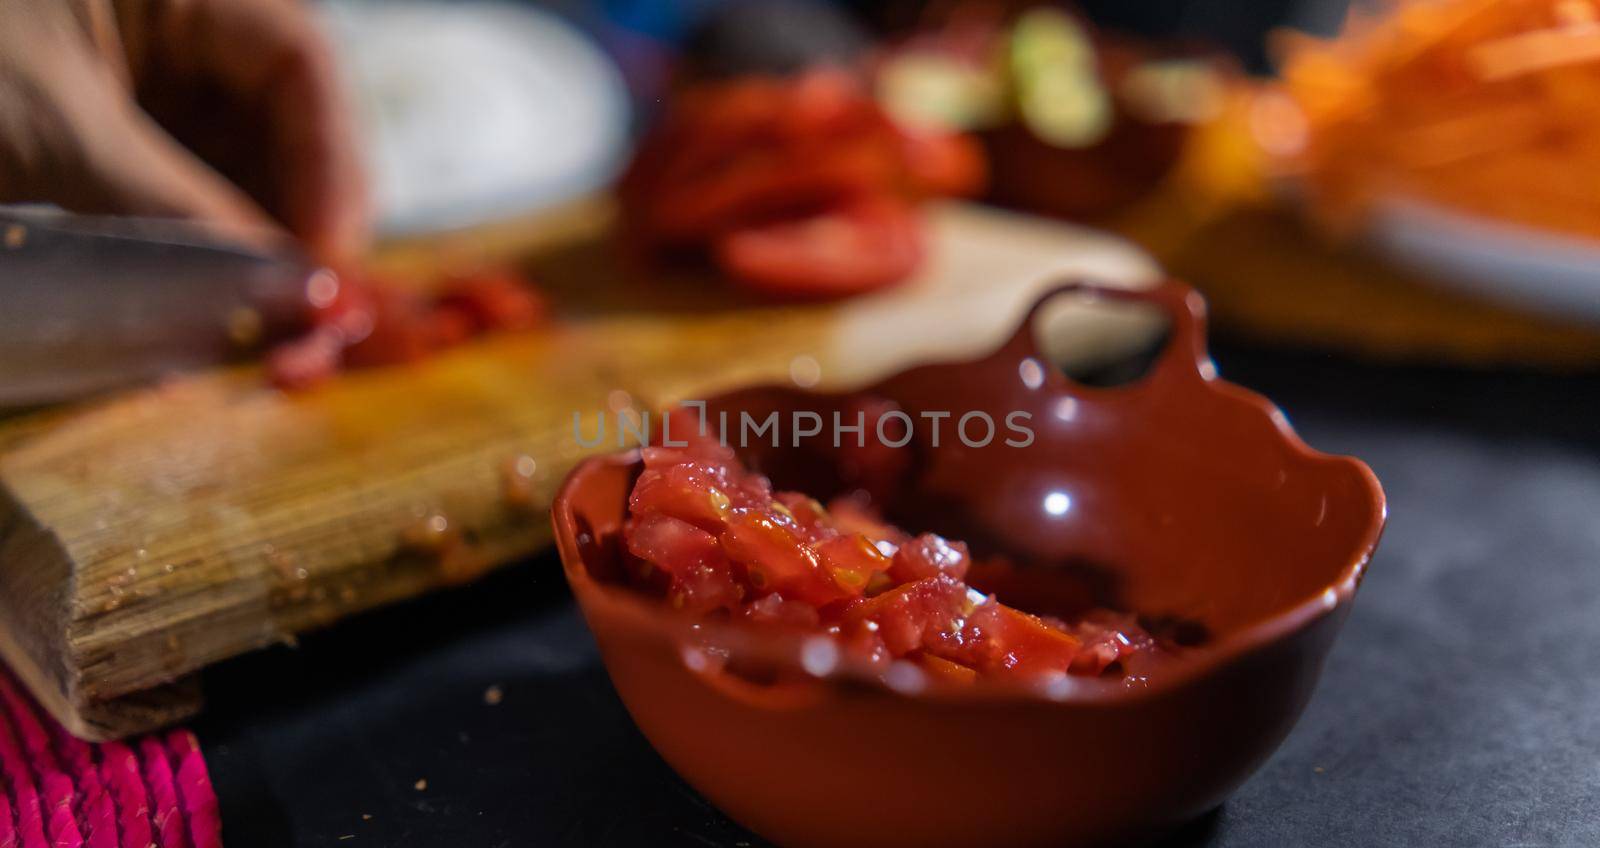 Close-up of chopped tomato in small clay pot with hands slicing more tomato as background. Person cutting fresh red vegetable with big knife on wooden cutting board. Healthy meal preparation